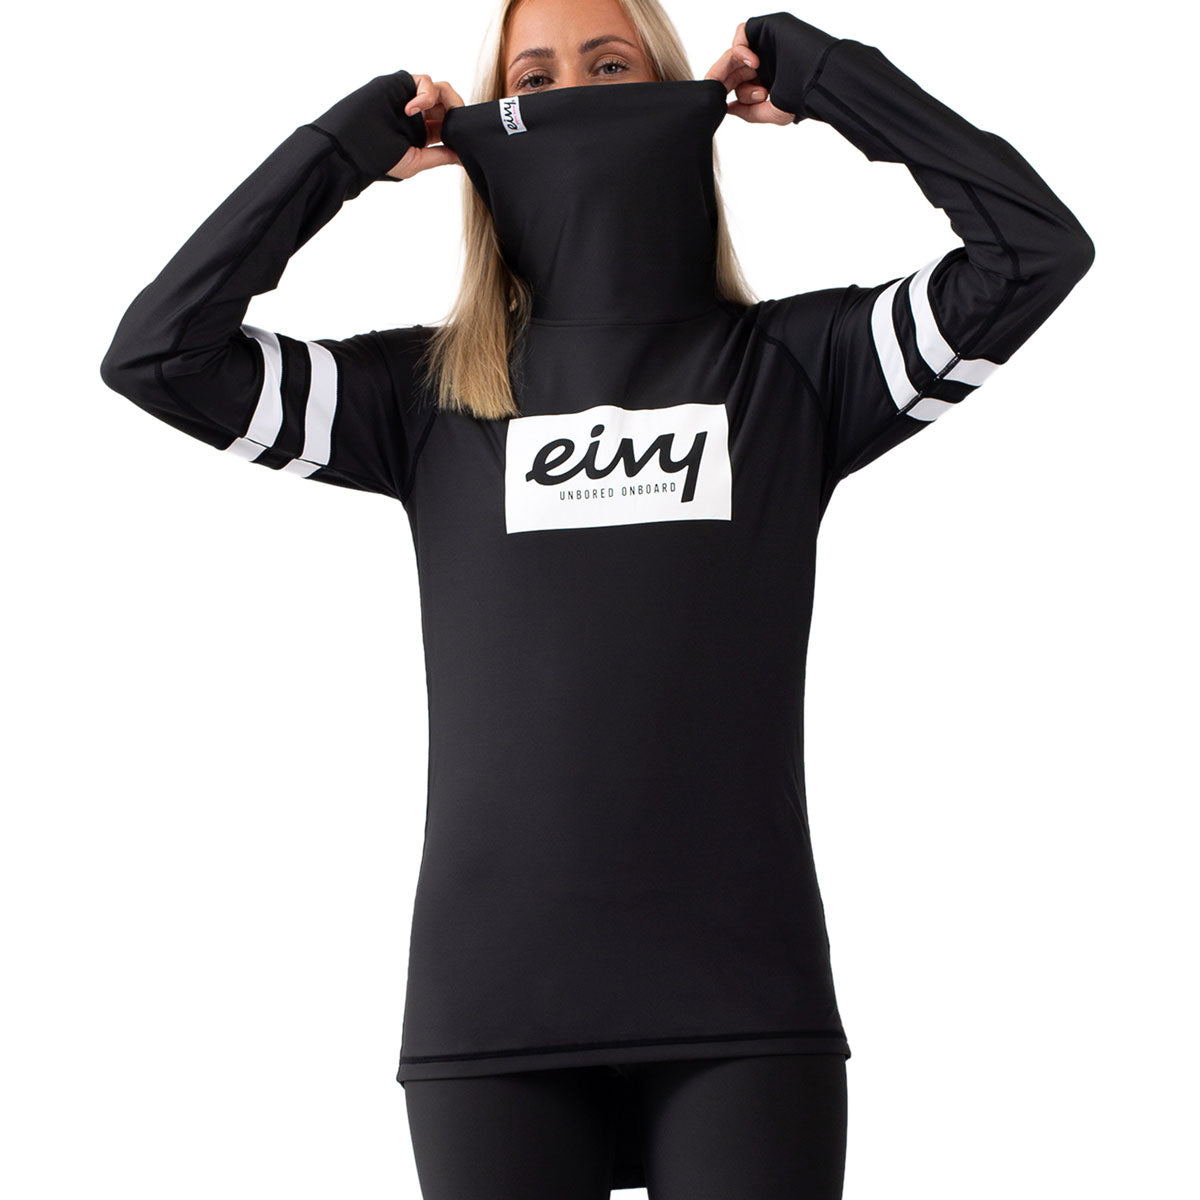 Eivy Icecold Top Snowboard Base Layer - Team Black image 3